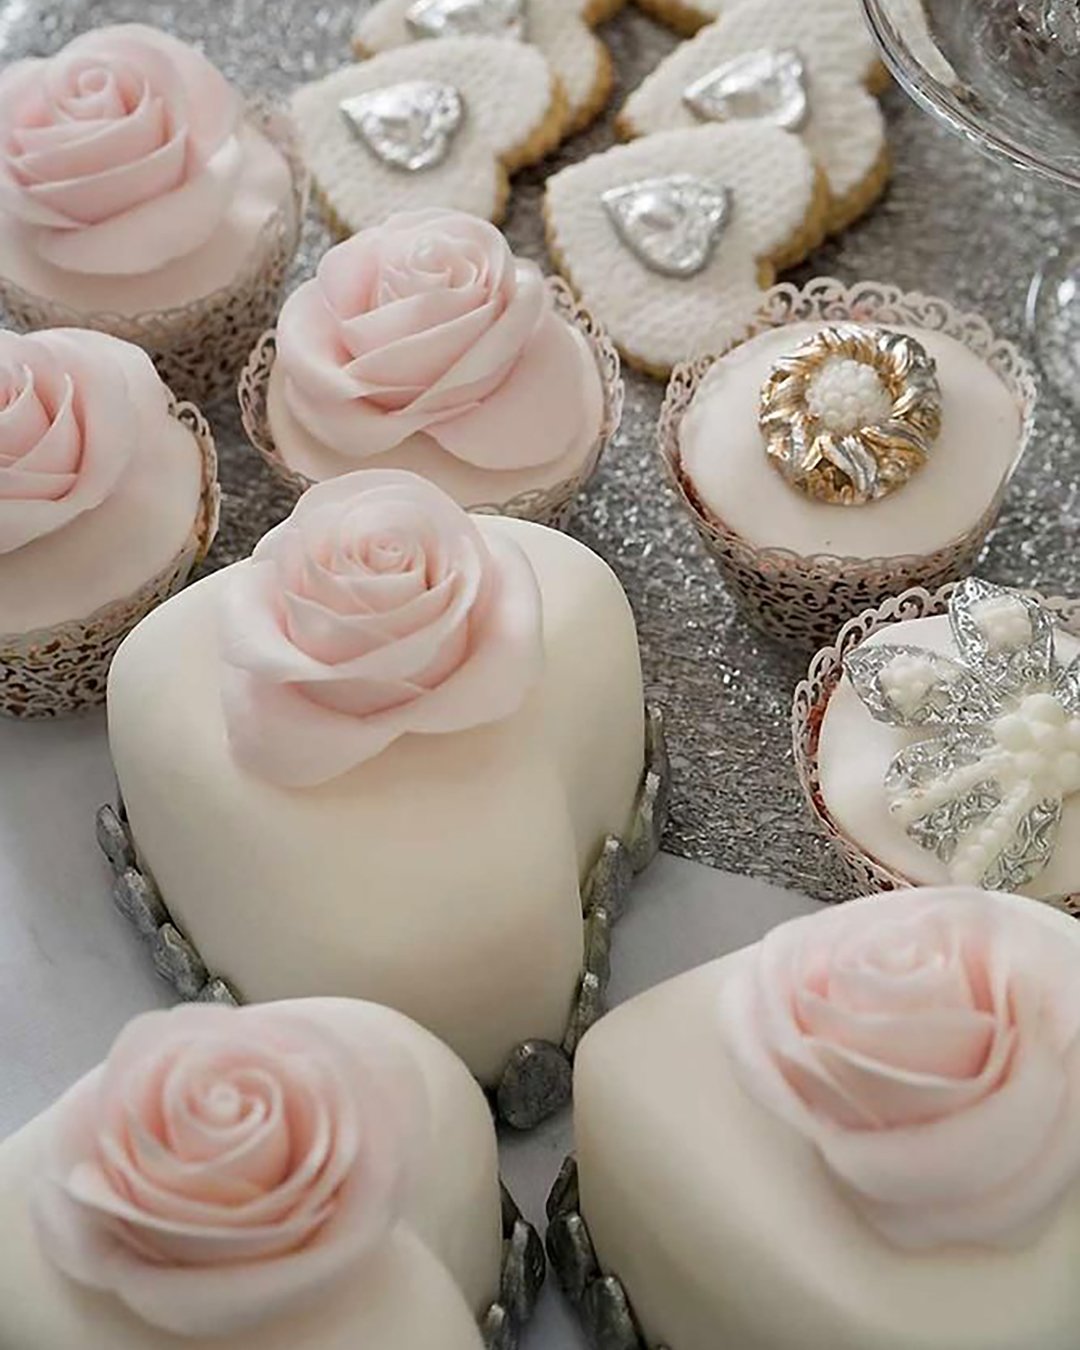 wedding cupcake tender pink and white roses and heart shaped wedding cakes